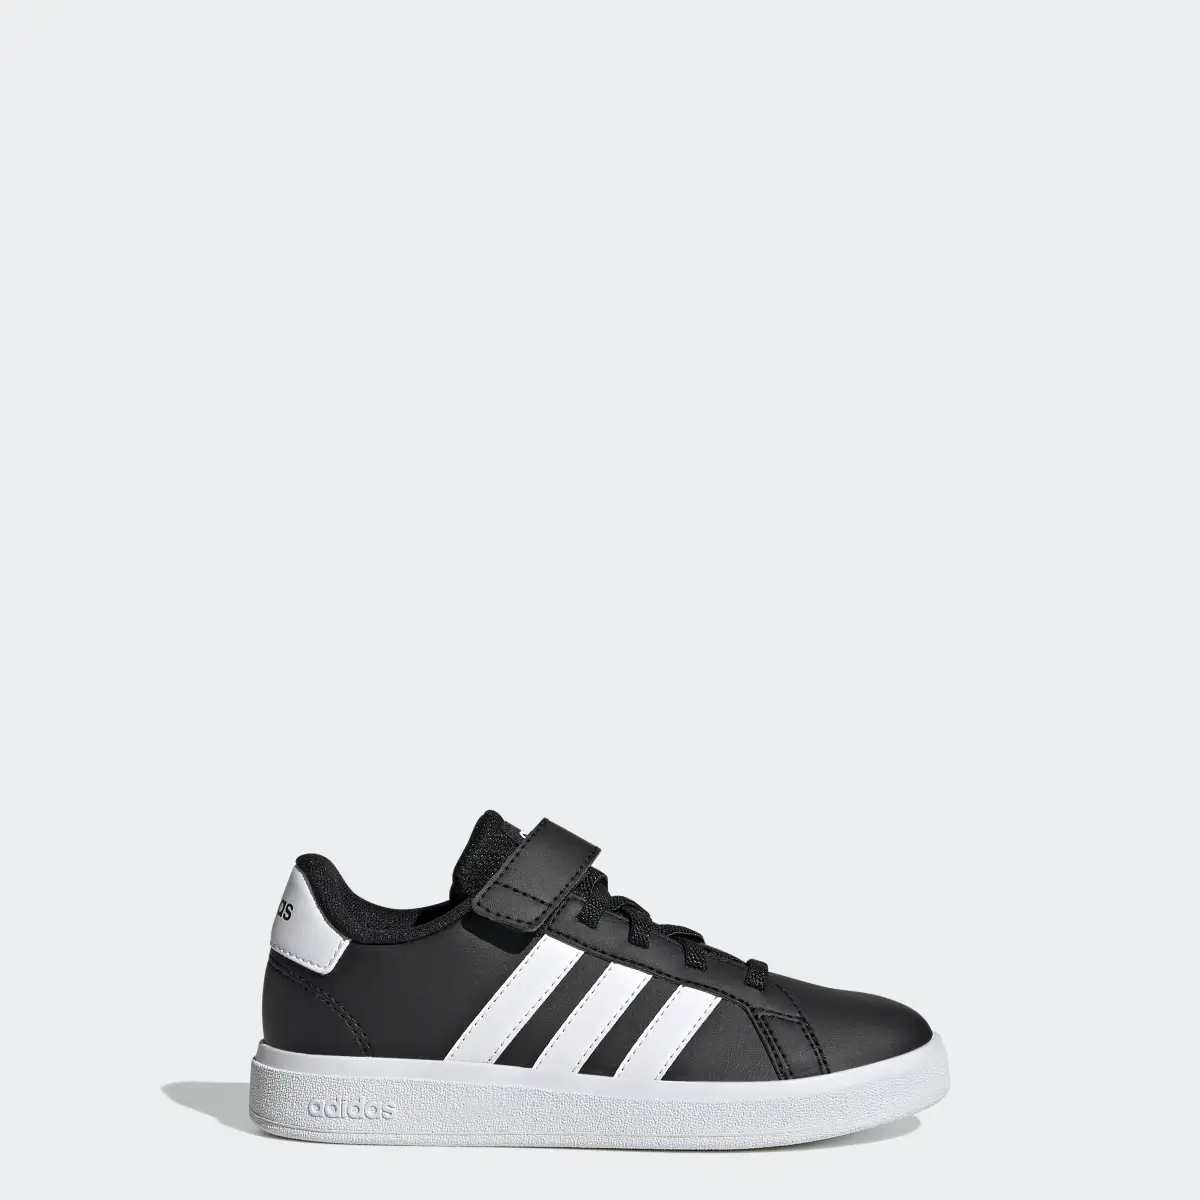 Adidas Grand Court Elastic Lace and Top Strap Shoes. 1